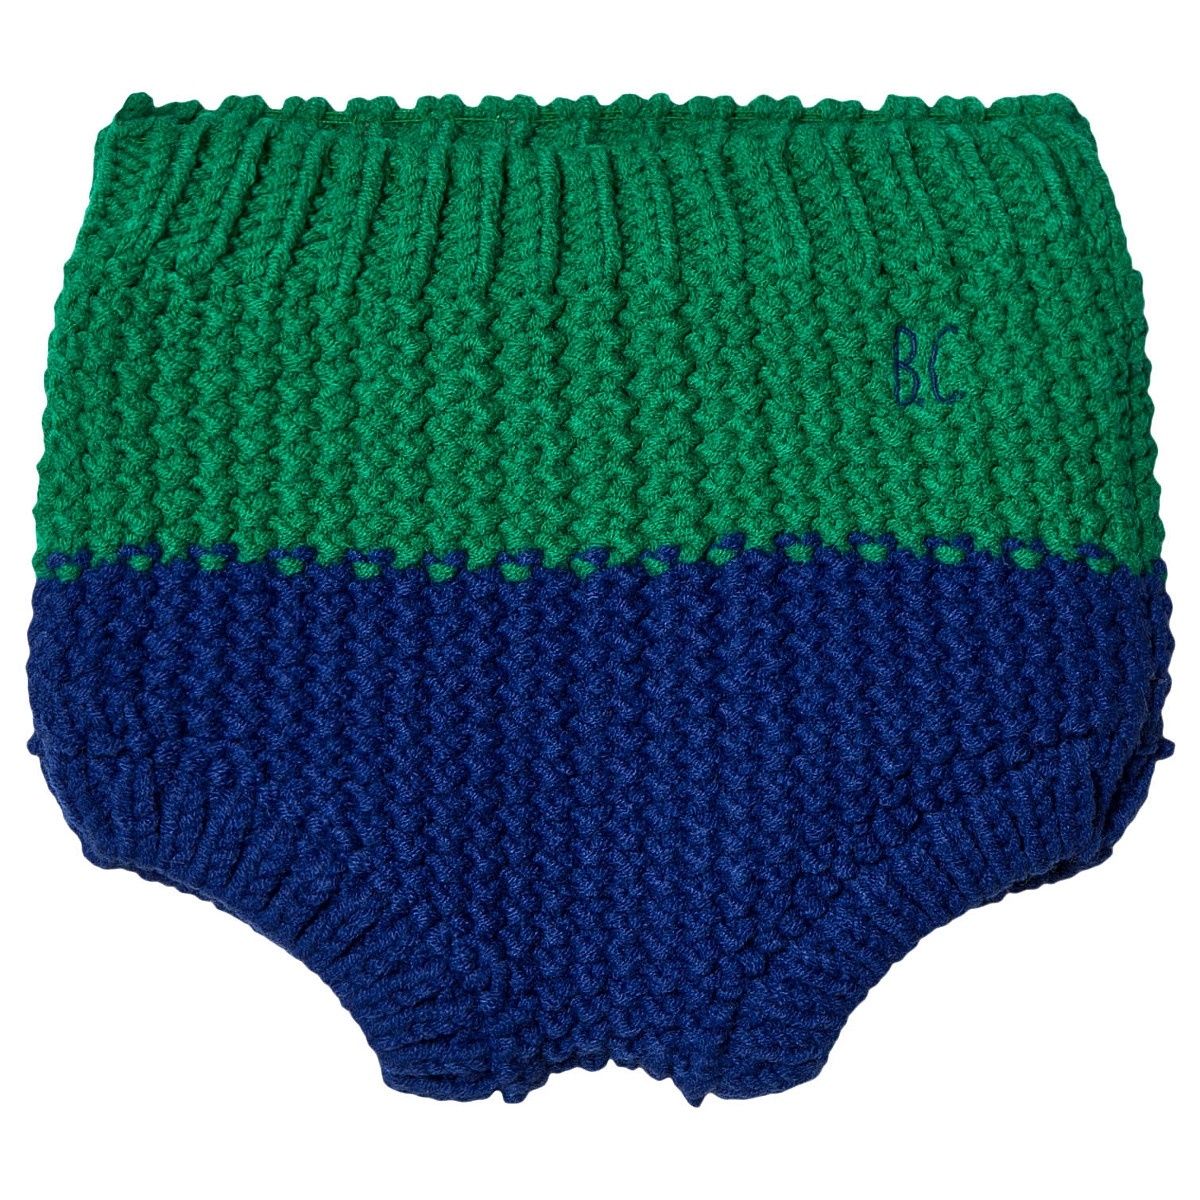 Bobo Choses Blue Knitted Culotte 218235 435 